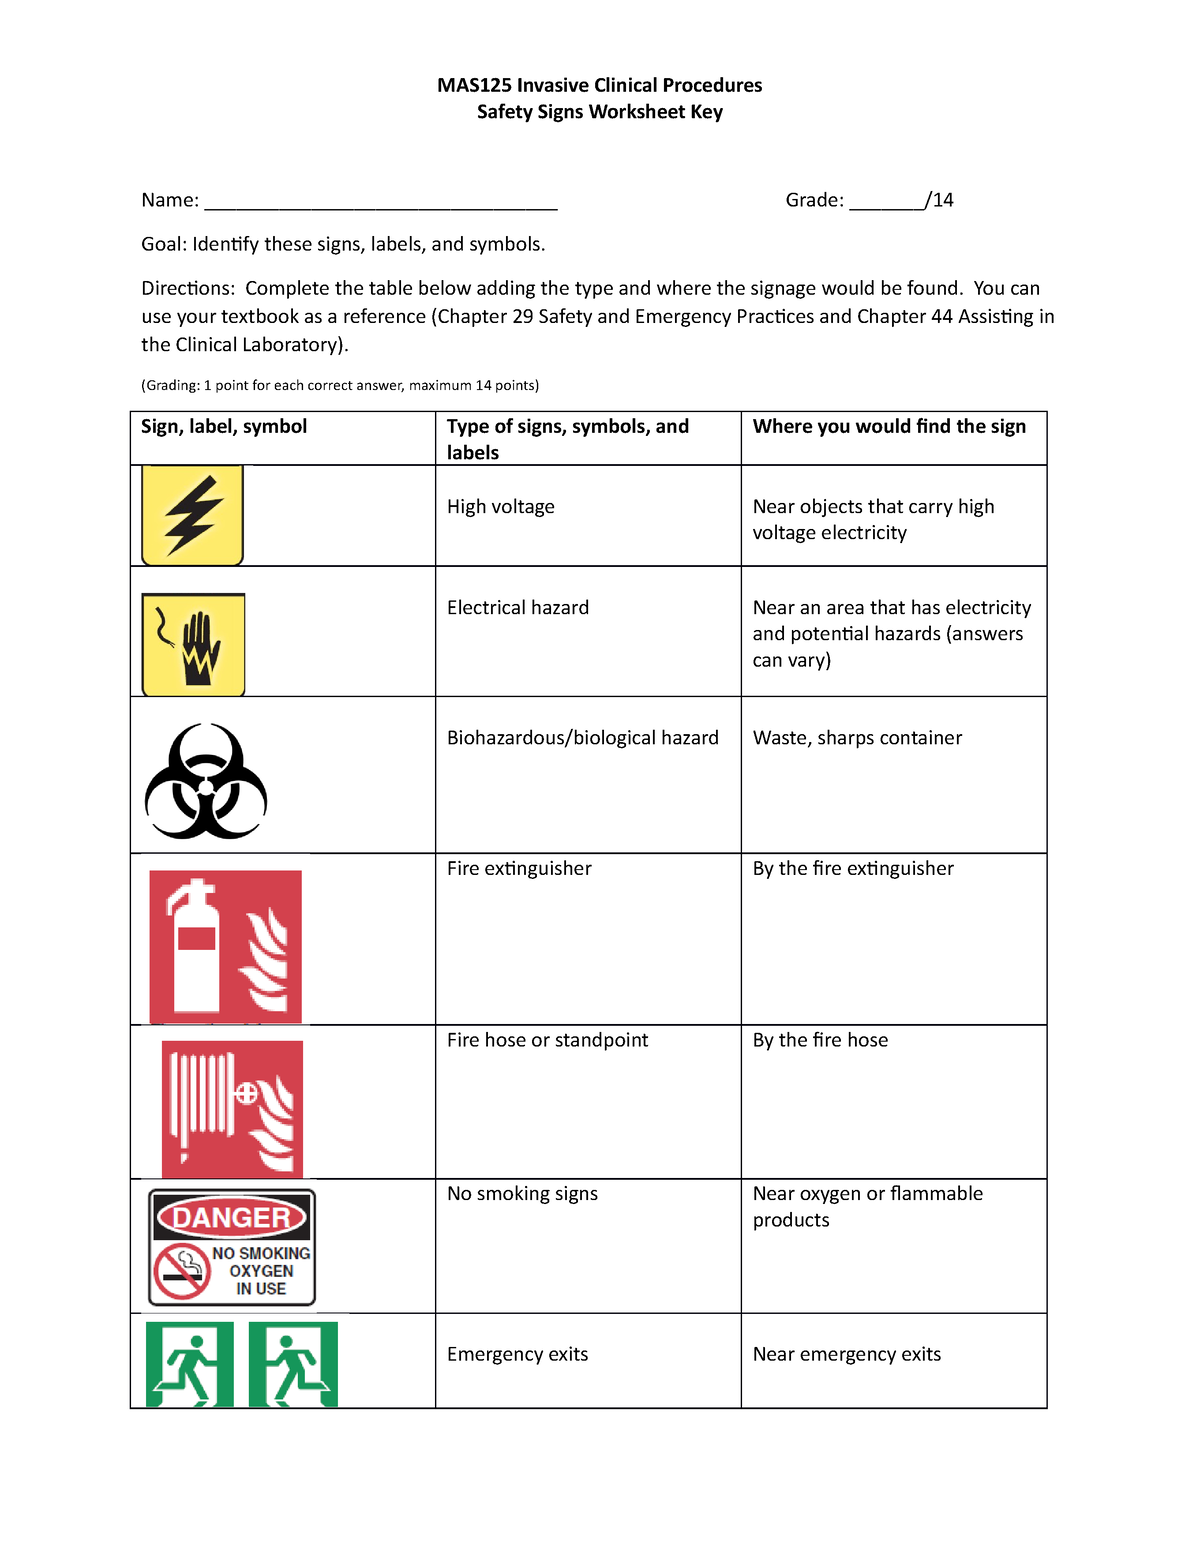 Safety Signs Worksheet Key - MAS125 Invasive Clinical Procedures Safety ...